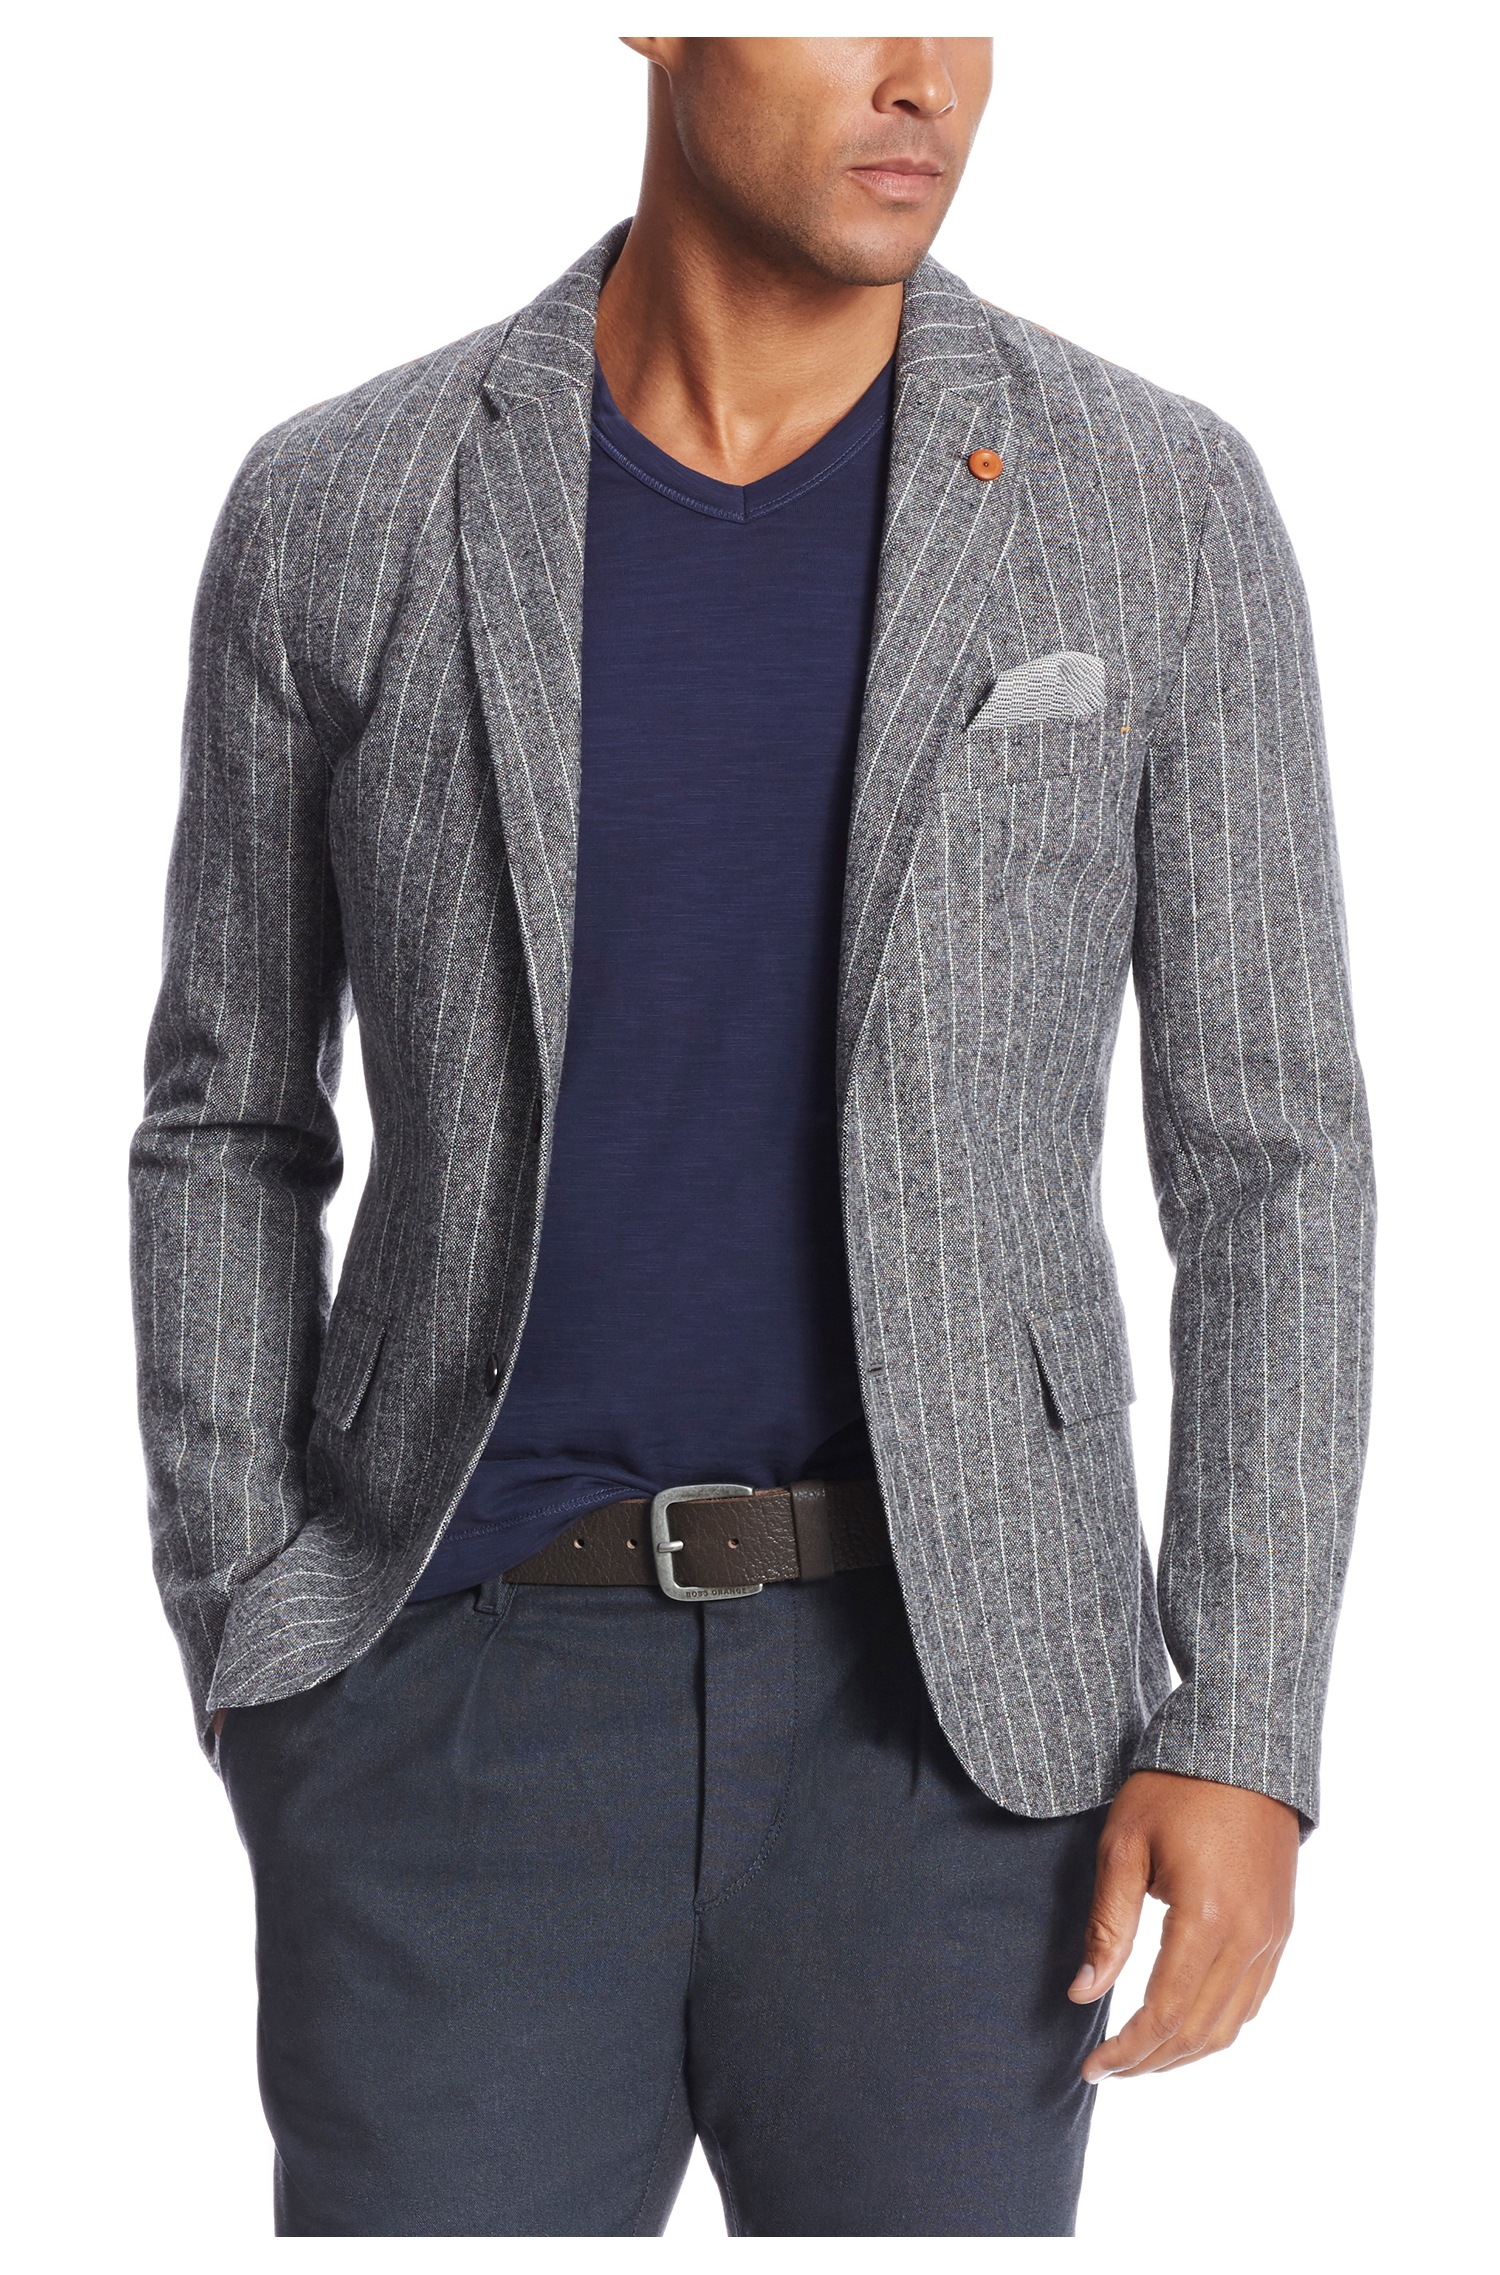 Enhed Besøg bedsteforældre Mansion hugo boss orange blazer Cheaper Than Retail Price> Buy Clothing,  Accessories and lifestyle products for women & men -